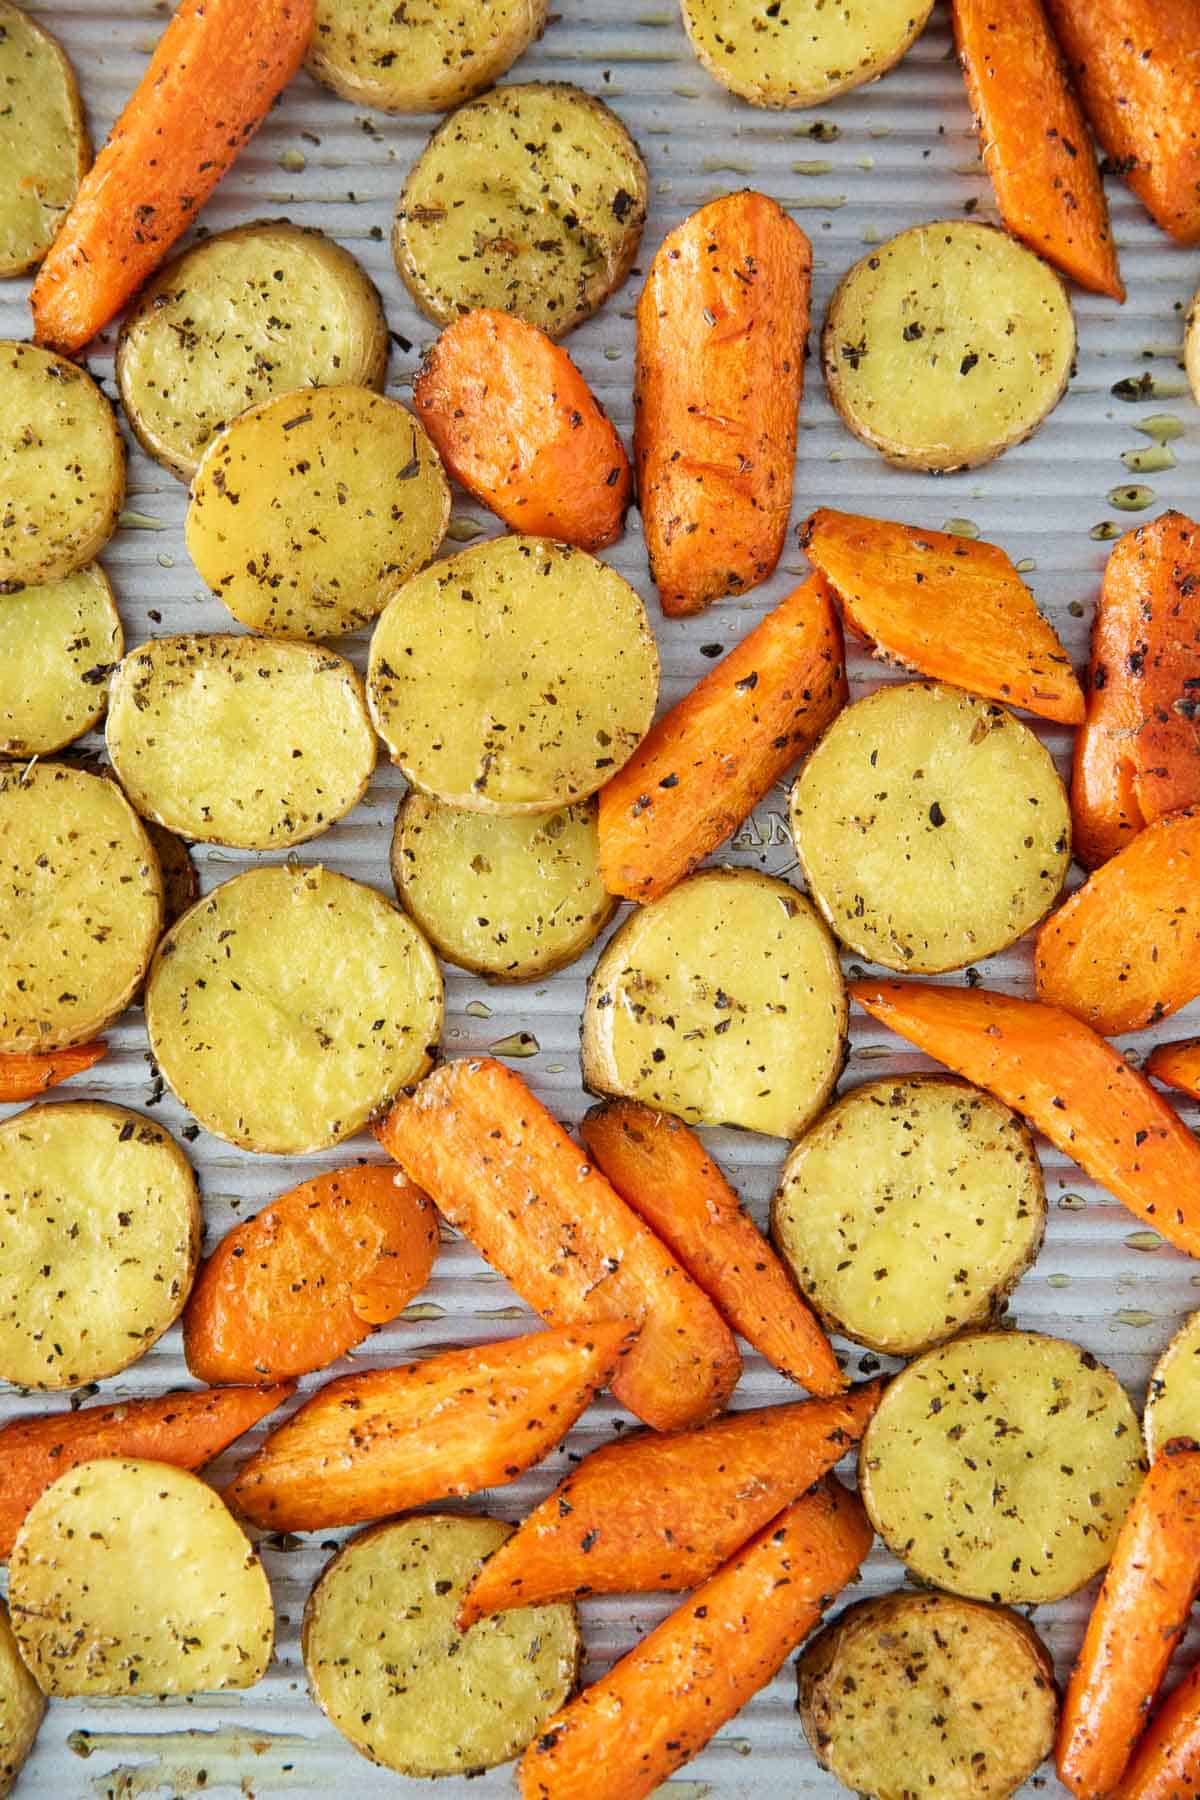 Roasted potatoes and carrots on pan.